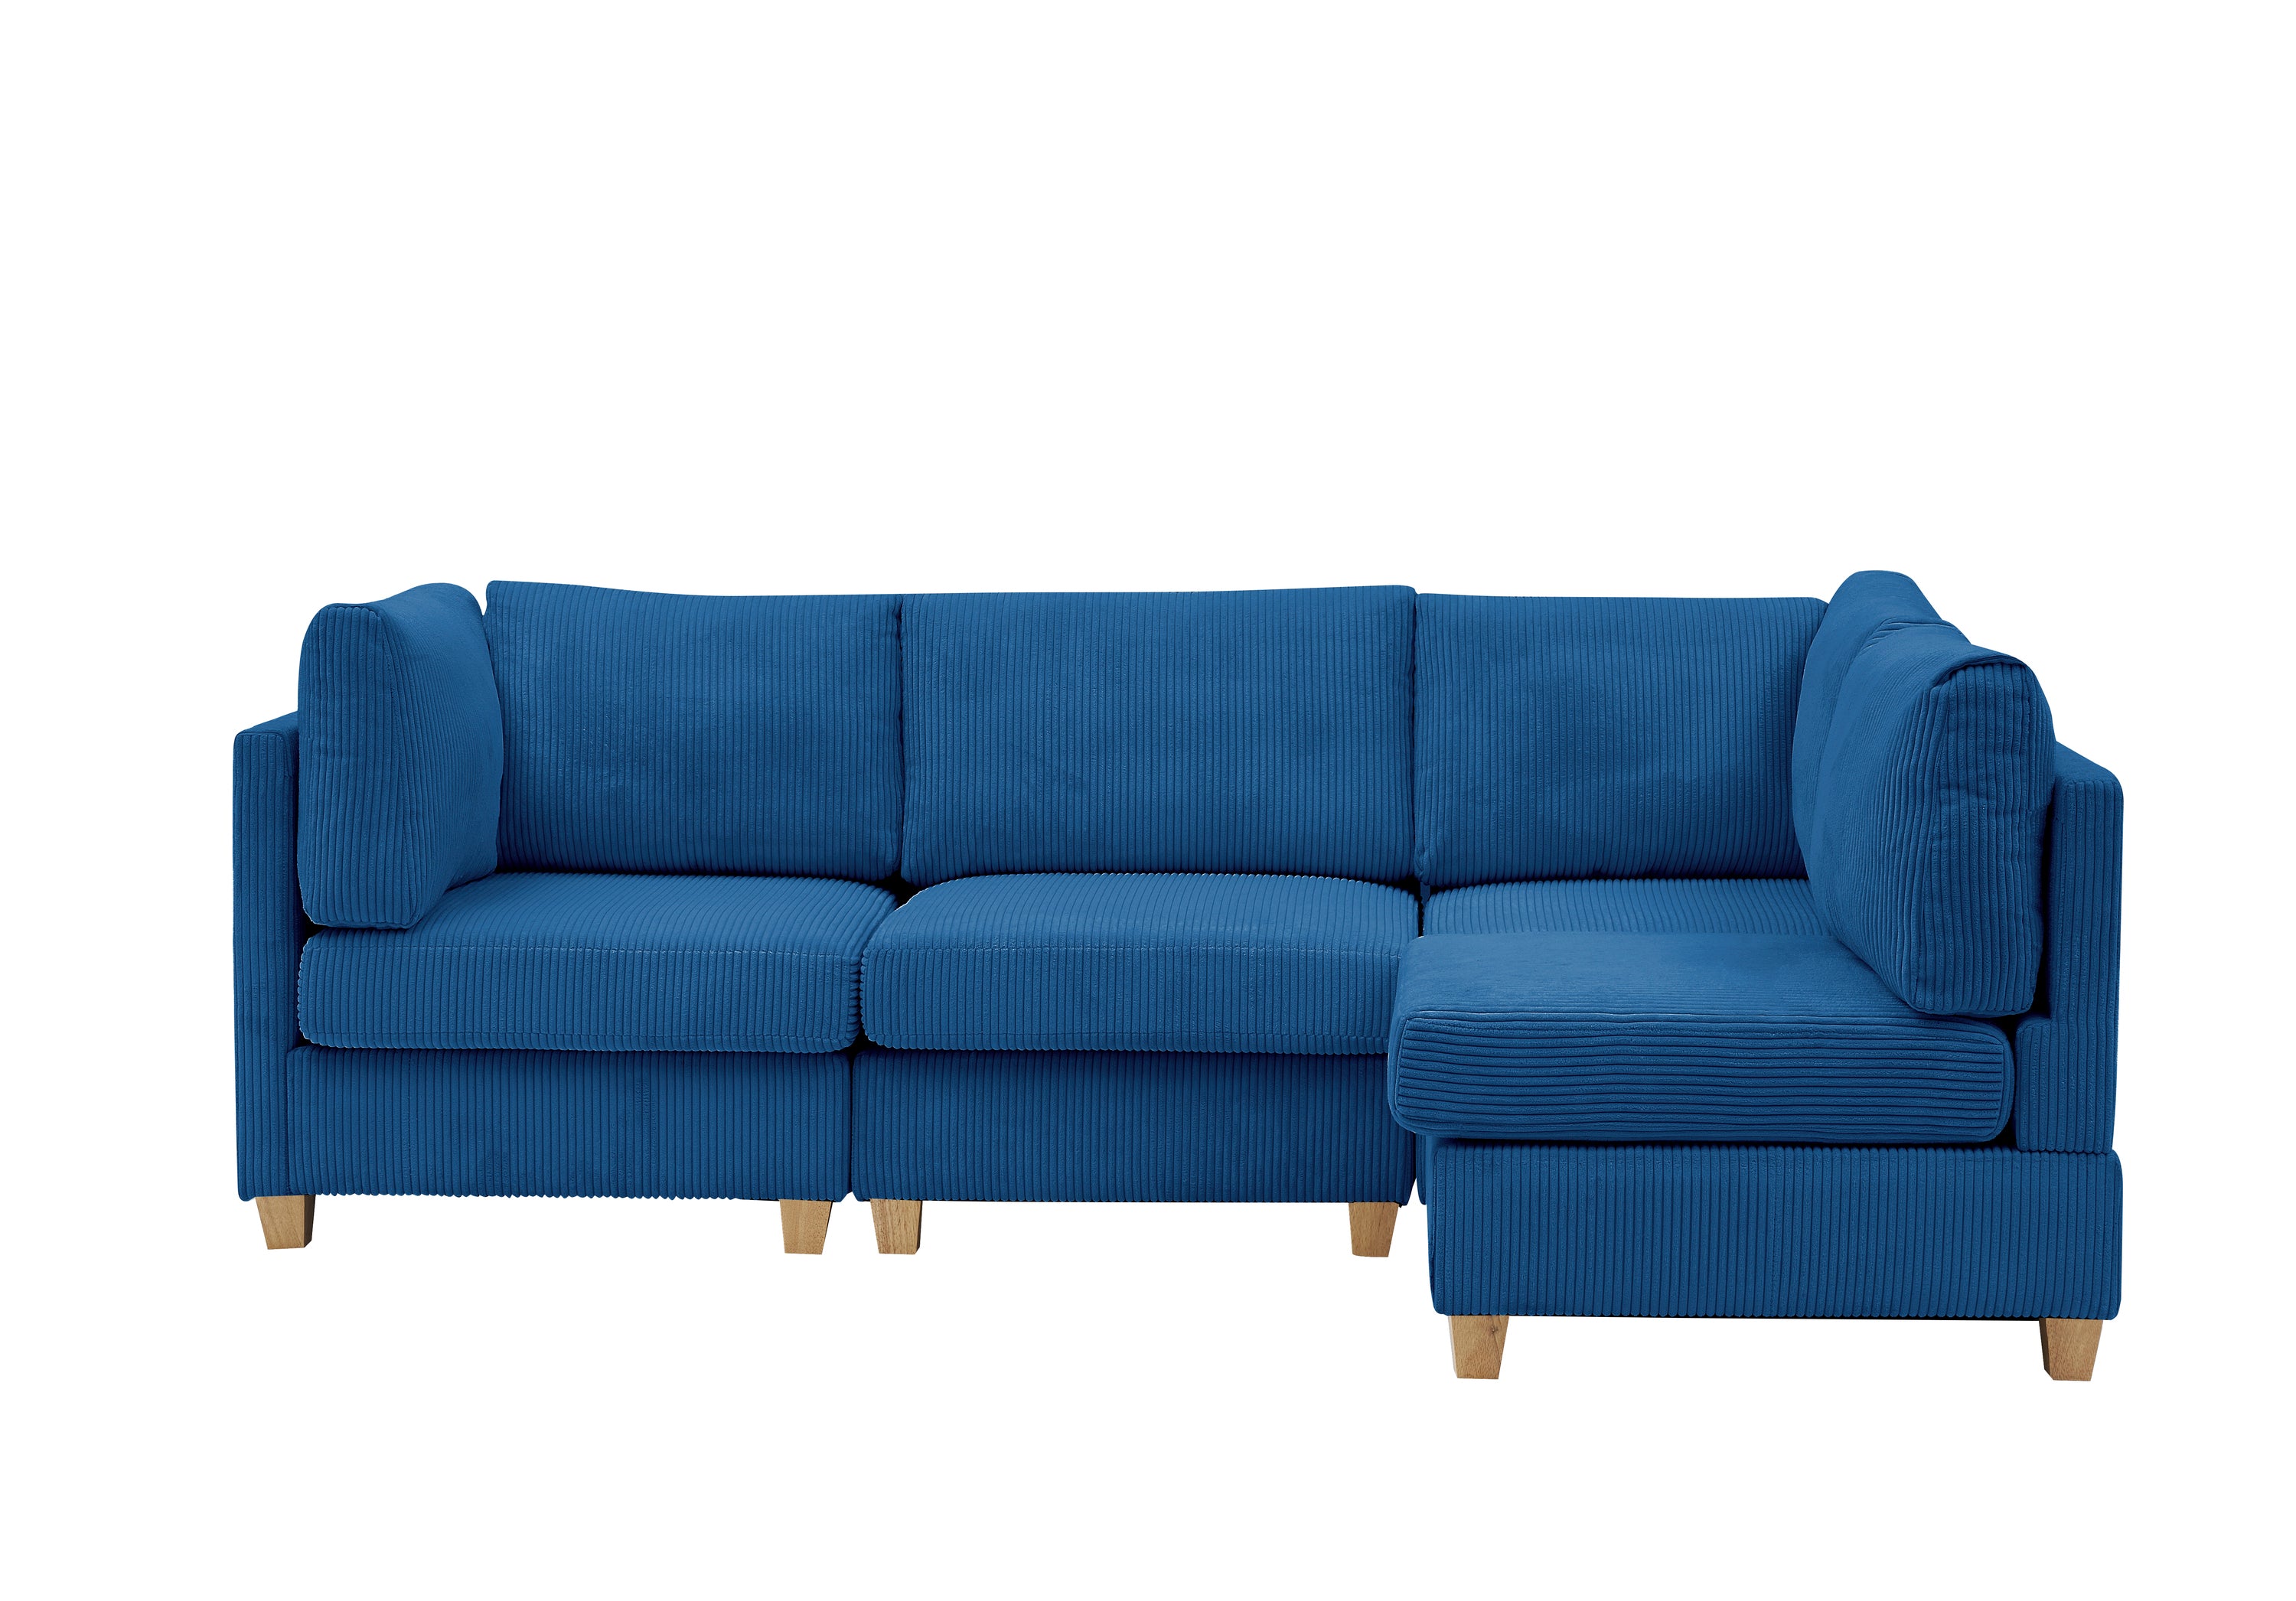 4 Pcs Corduroy Living Room Sectional Sofa with Wood Legs, Blue